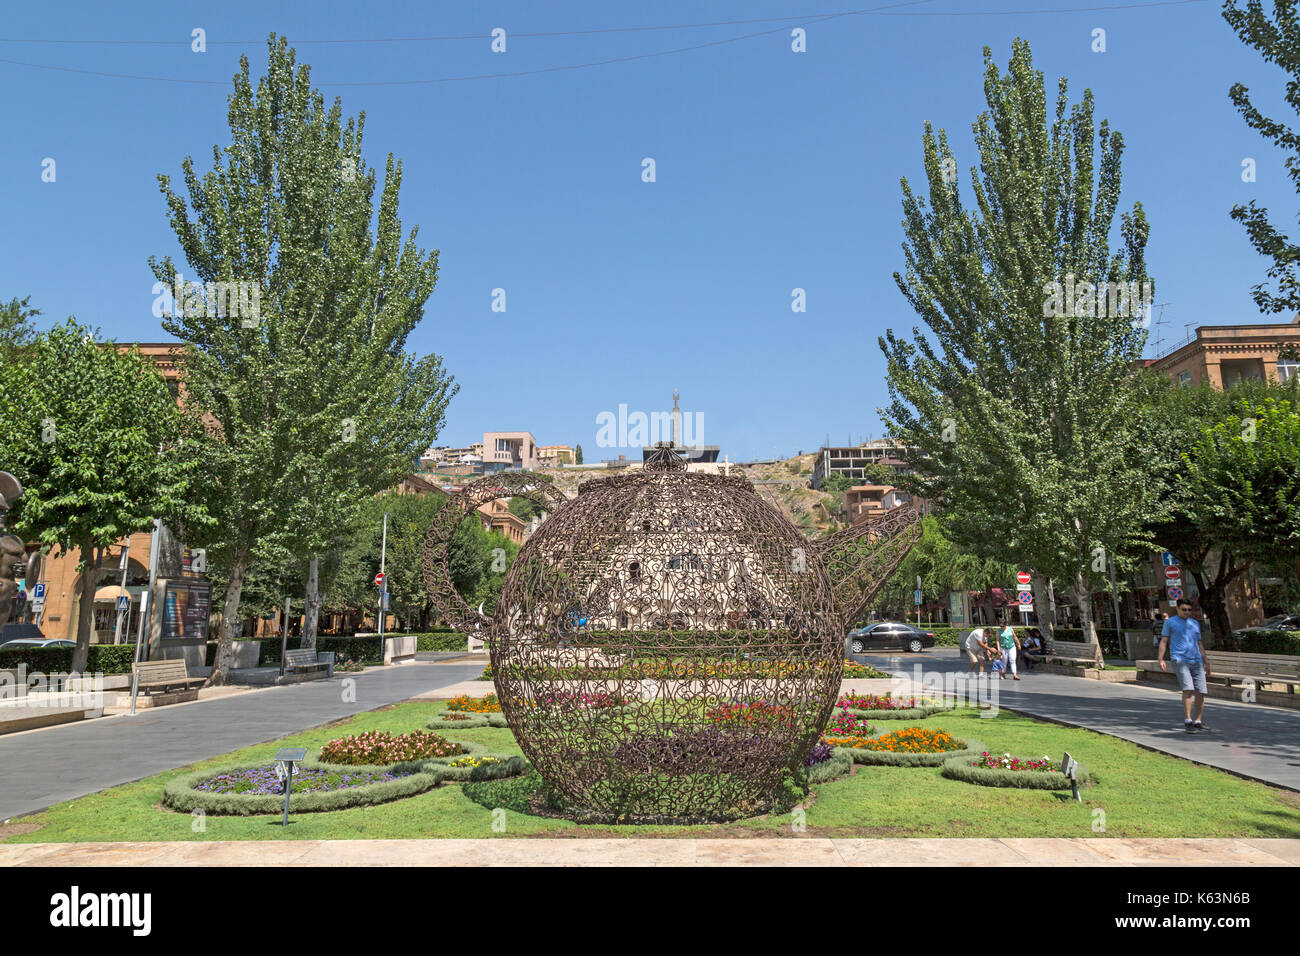 Statue  of a giant Teapot located in a flower bed as part of the Cascade Museum of Art in Yerevan, Armenia. Stock Photo